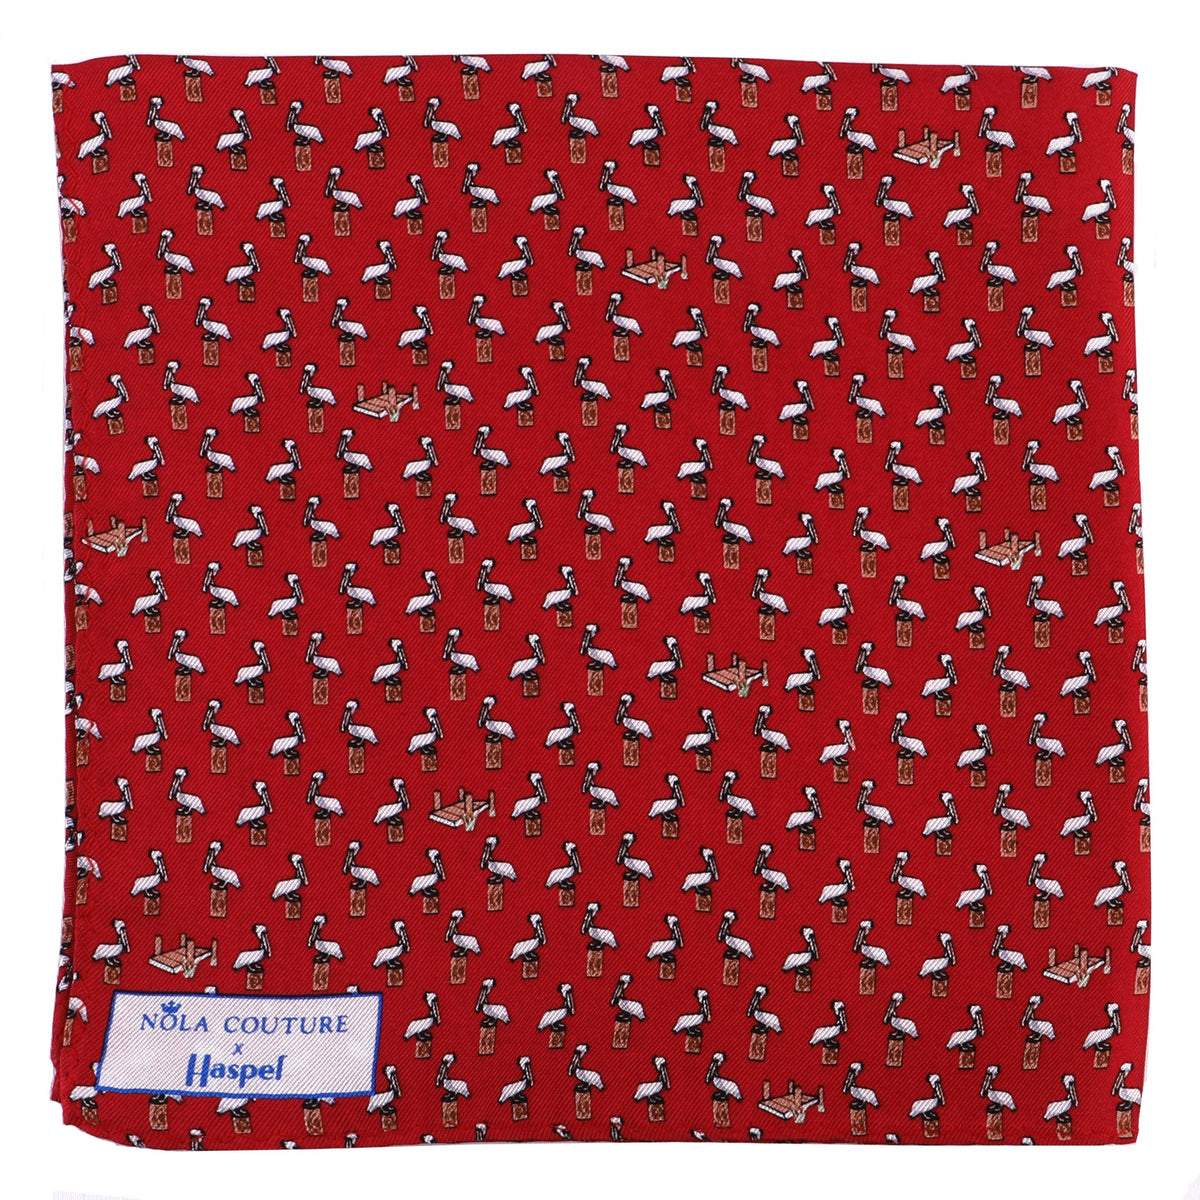 Limited Edition NOLA Couture X Haspel Red Pelican Print Pocket Square - O/S